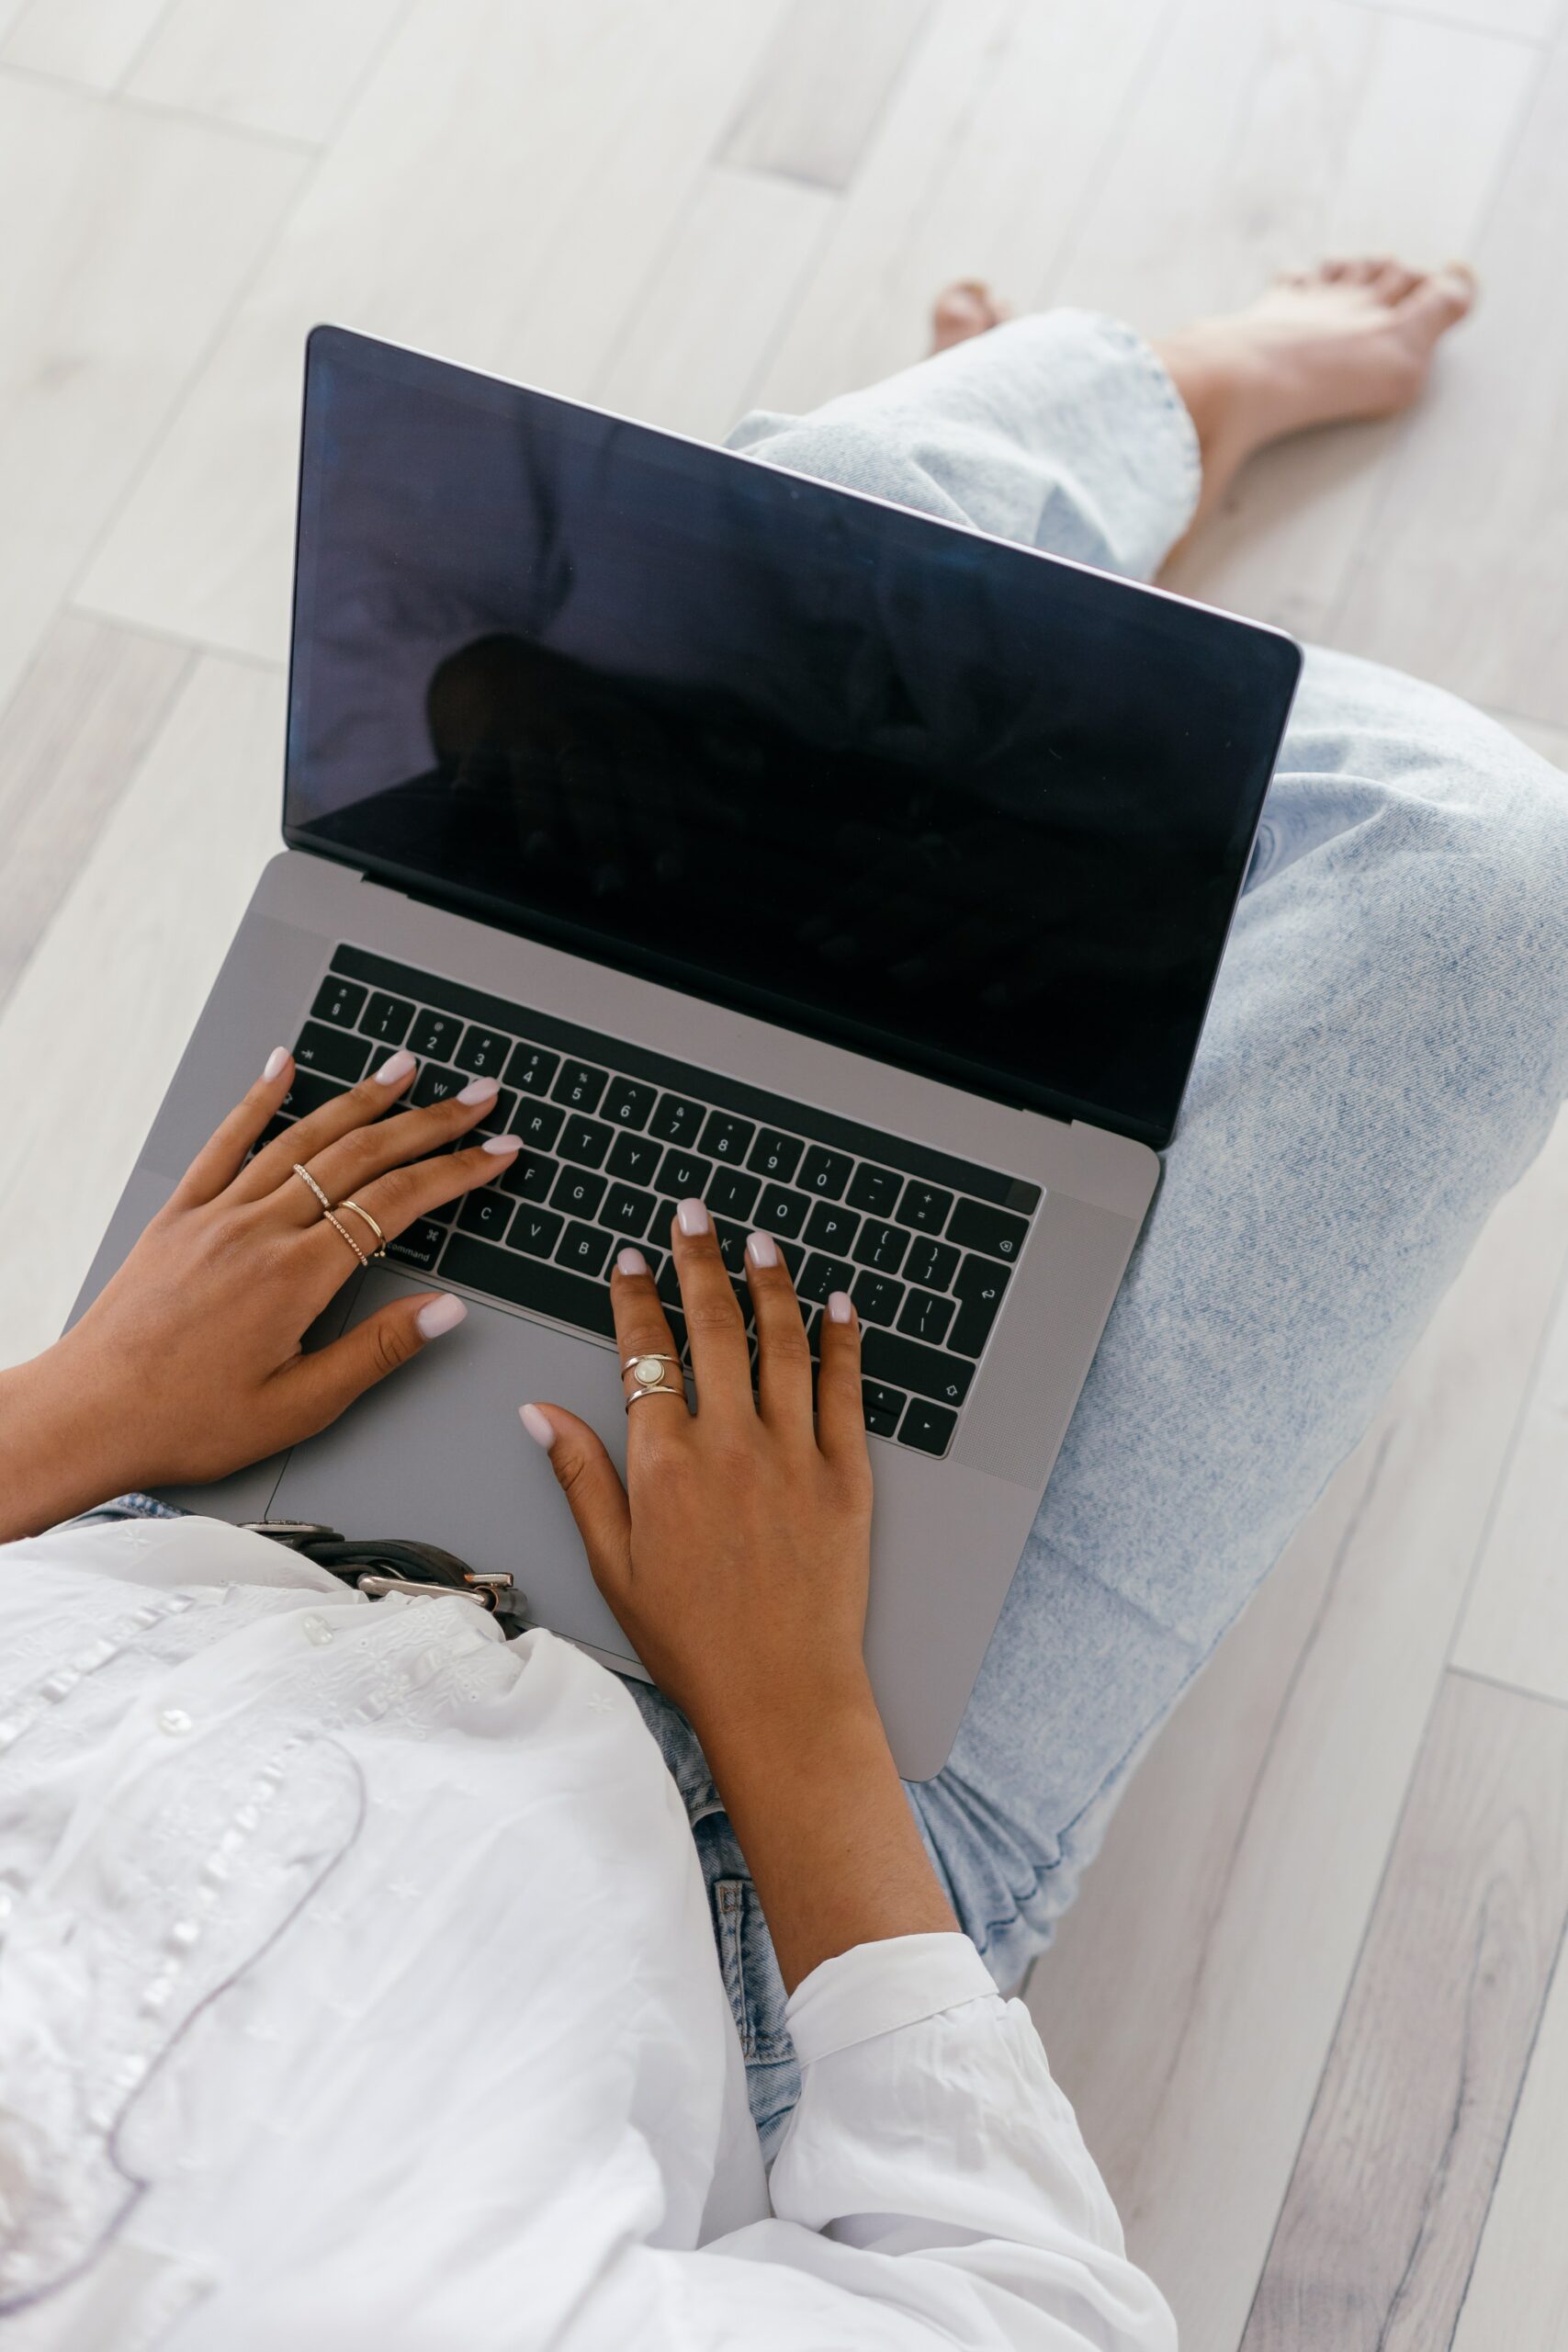 Woman in shirt and jeans sitting on hardwood floor with laptop